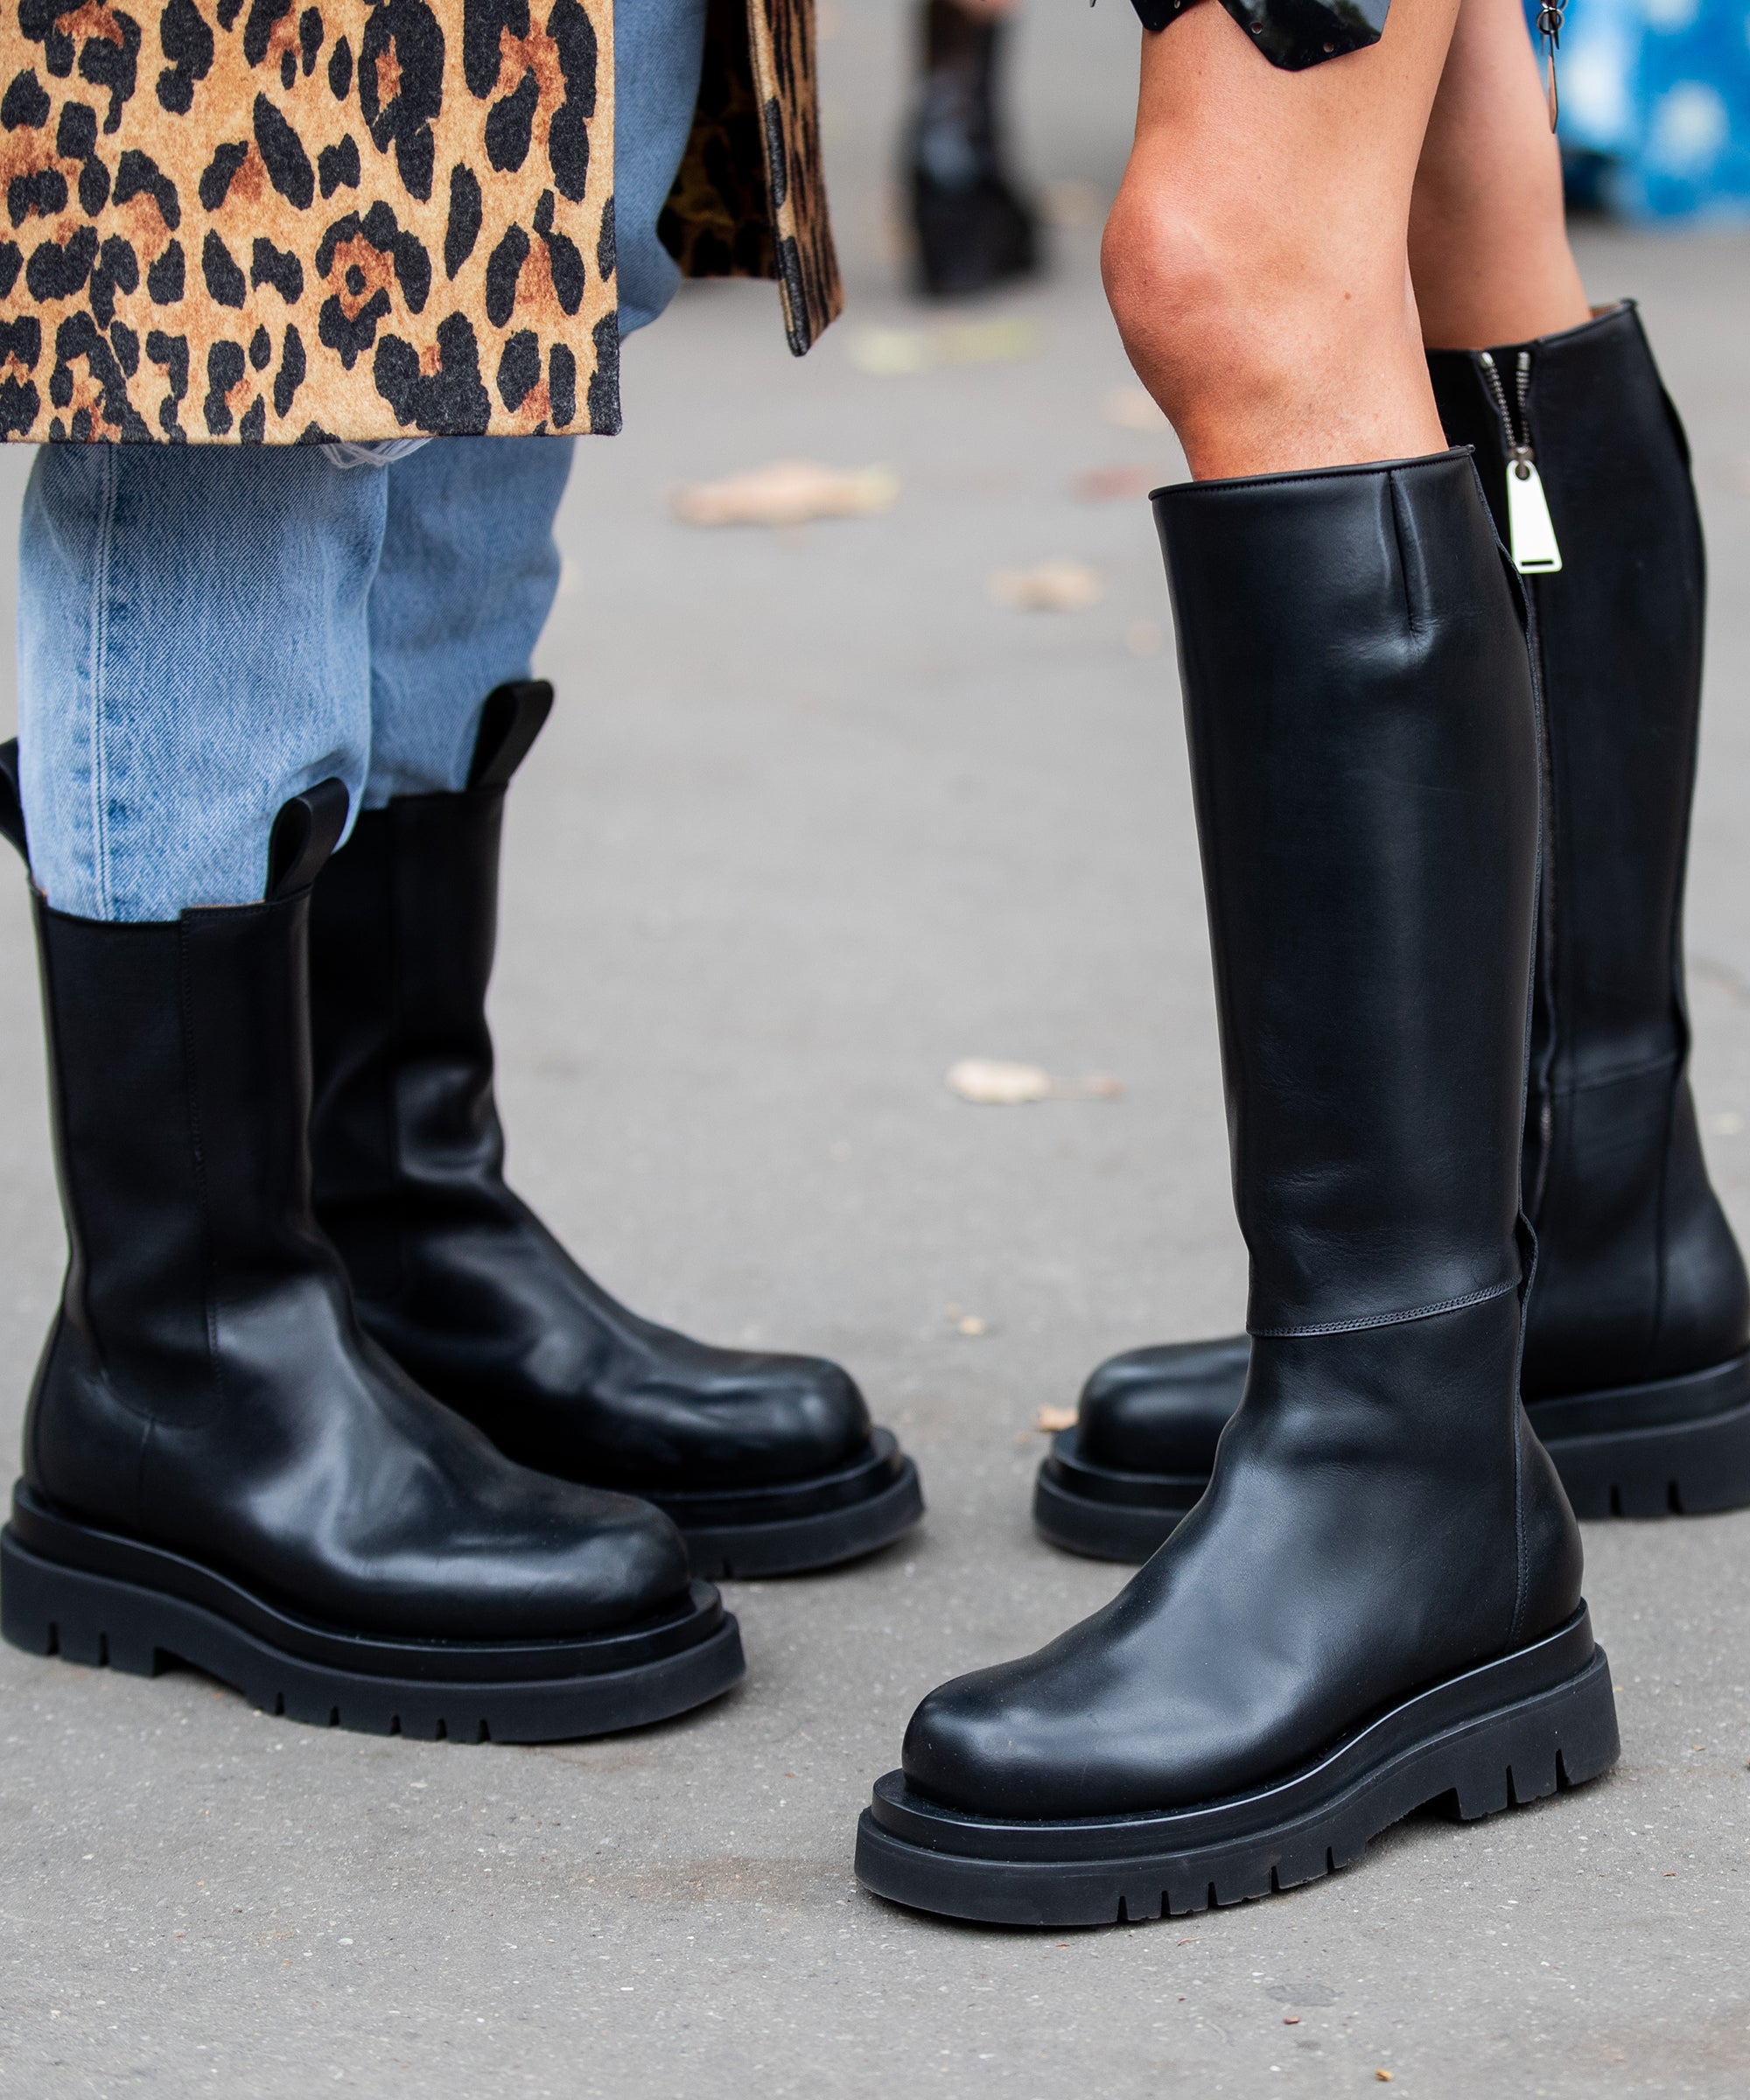 fall 2019 boot styles